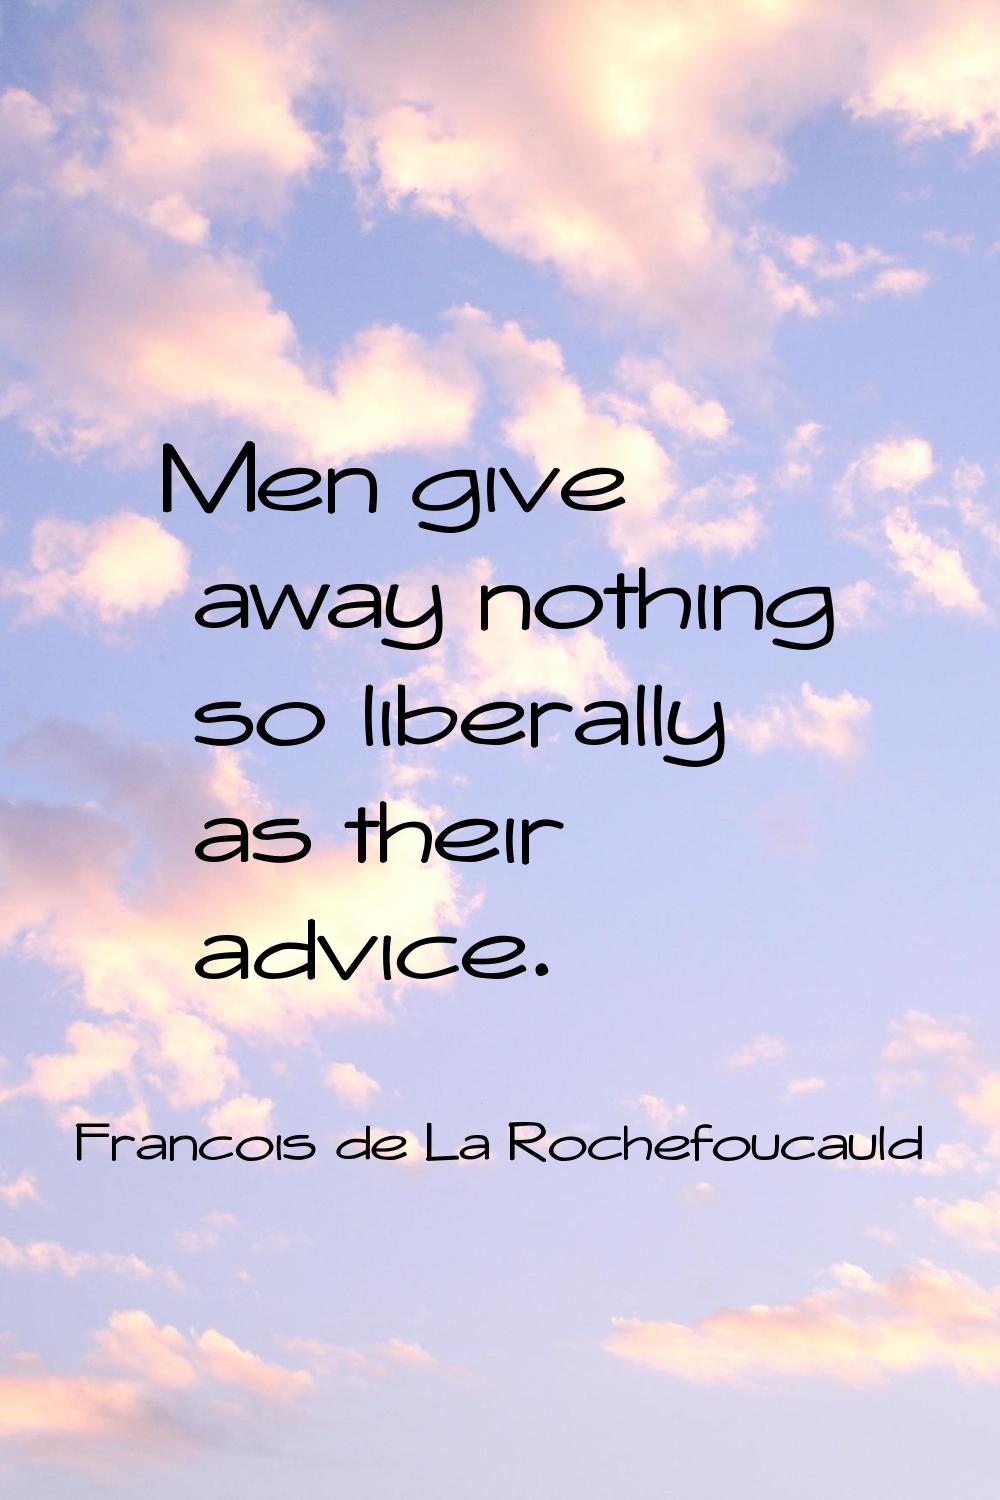 Men give away nothing so liberally as their advice.